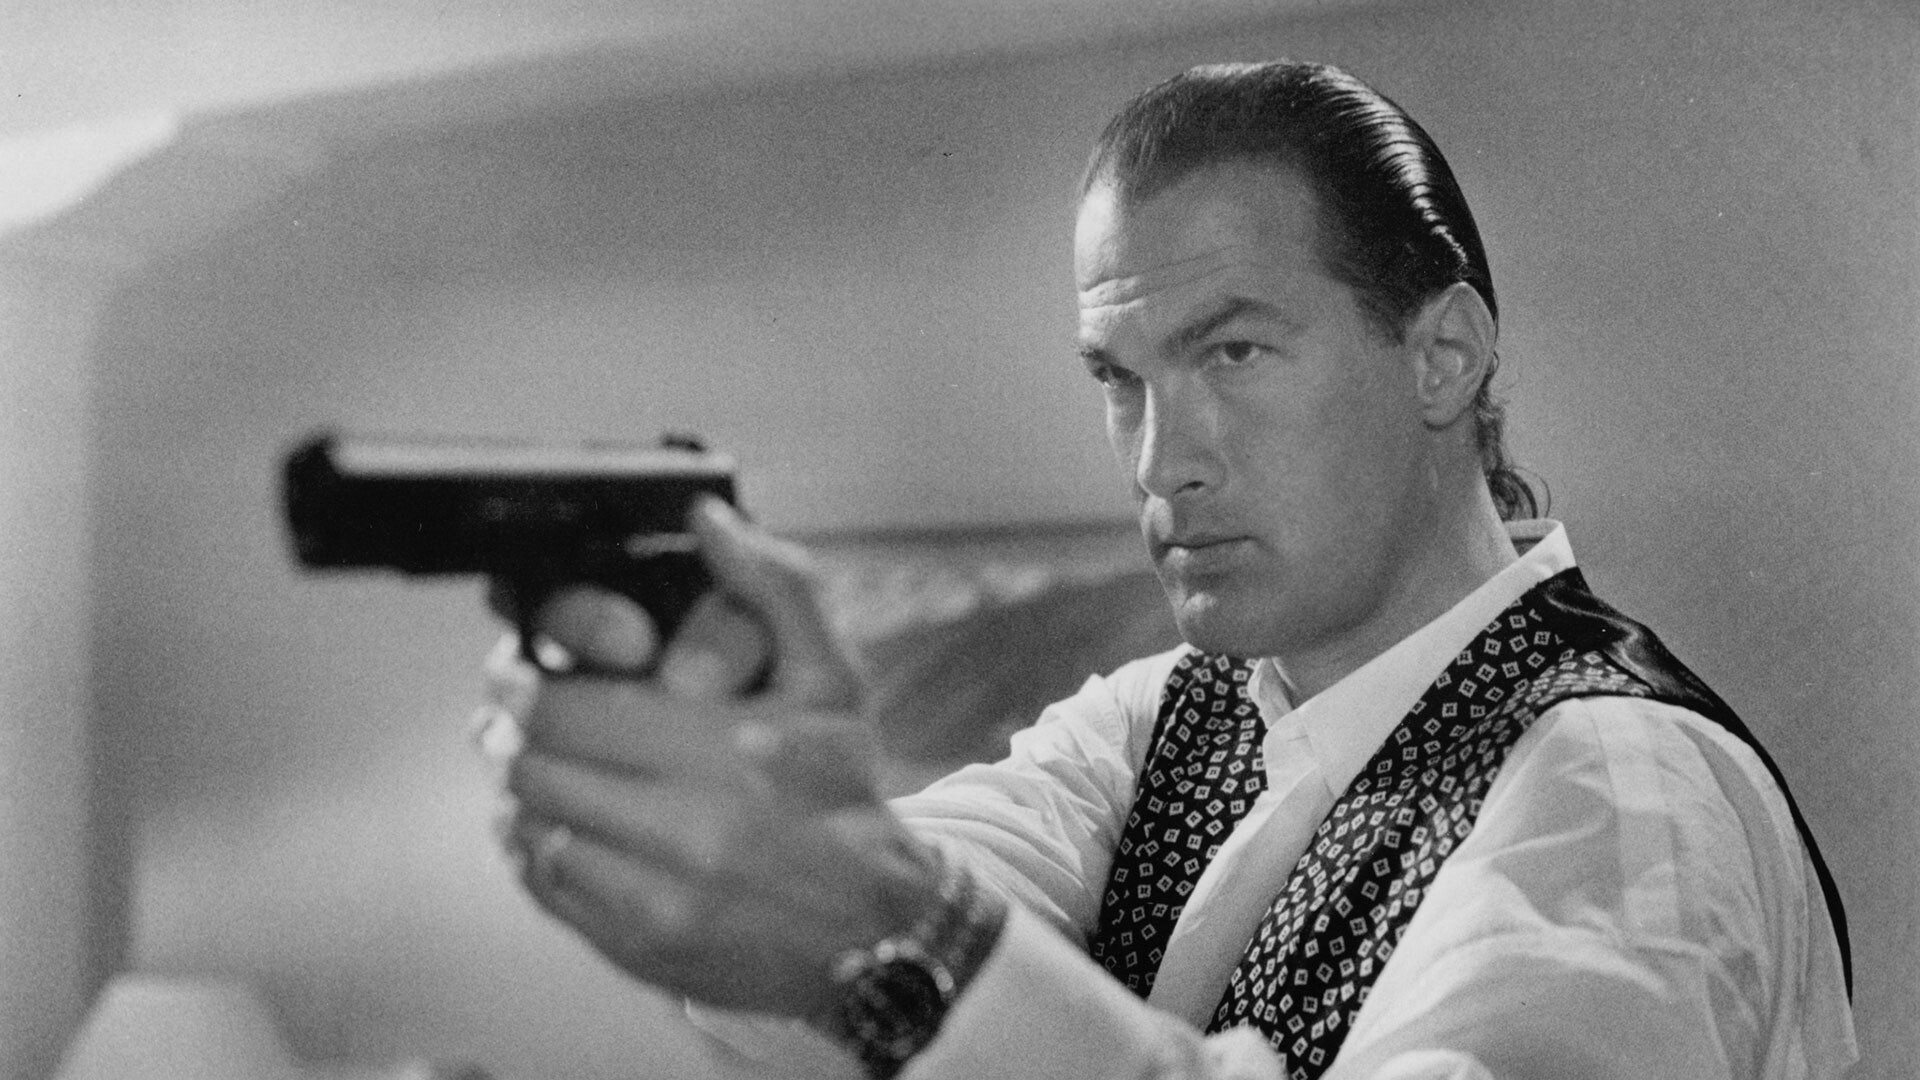 Steven Seagal: Black and white, A famous actor, martial artist and musician, Producing and starring in action movies. 1920x1080 Full HD Wallpaper.